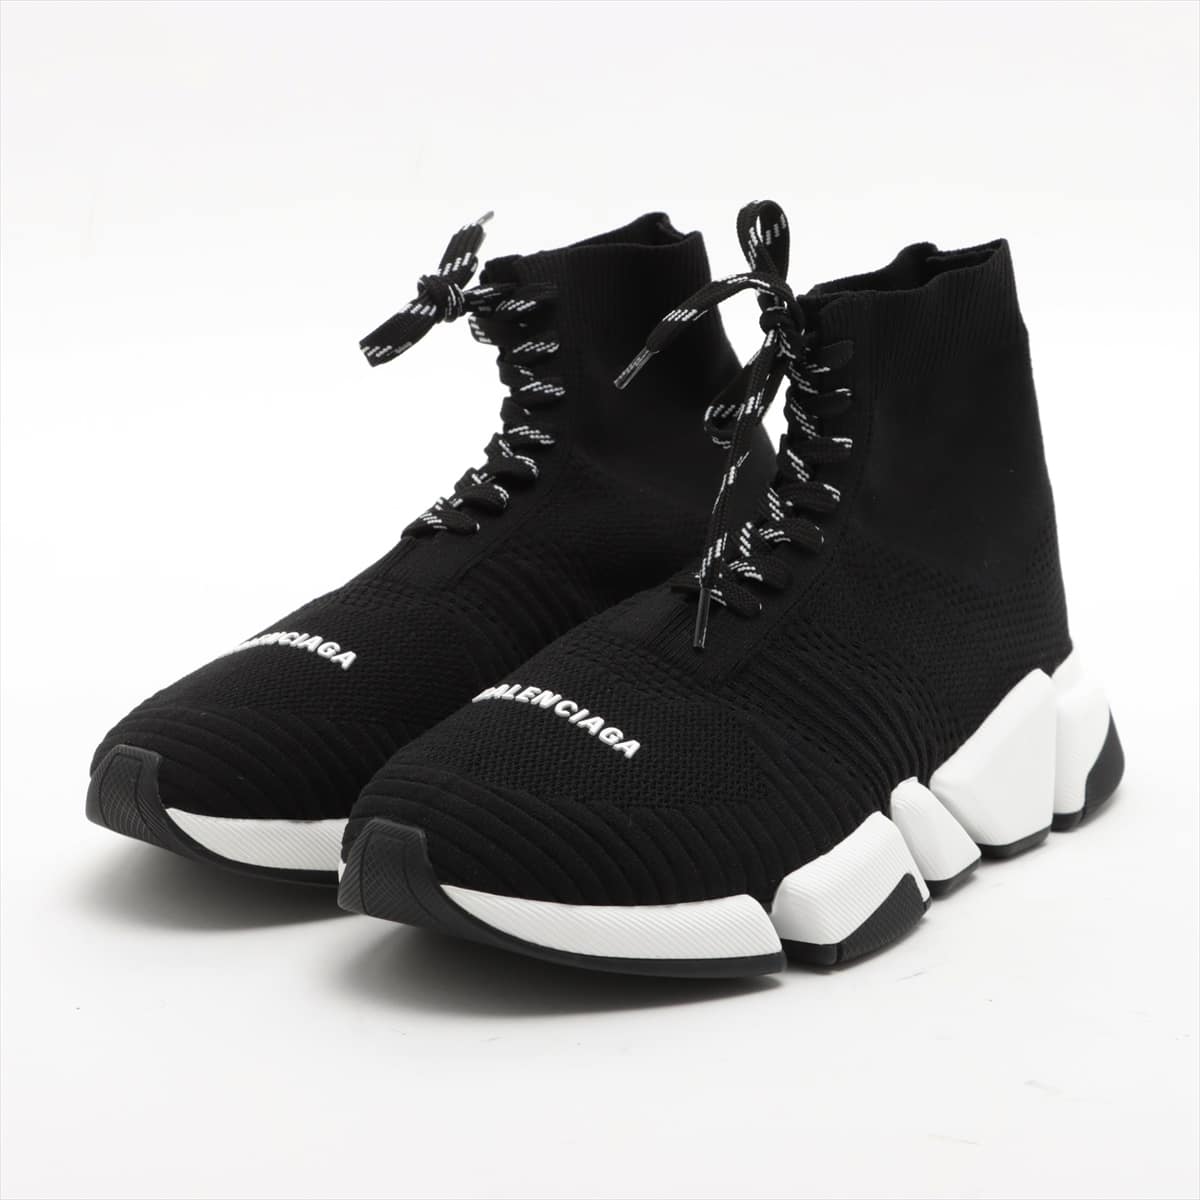 Balenciaga Speed trainer Knit High-top Sneakers 40 Men's Black